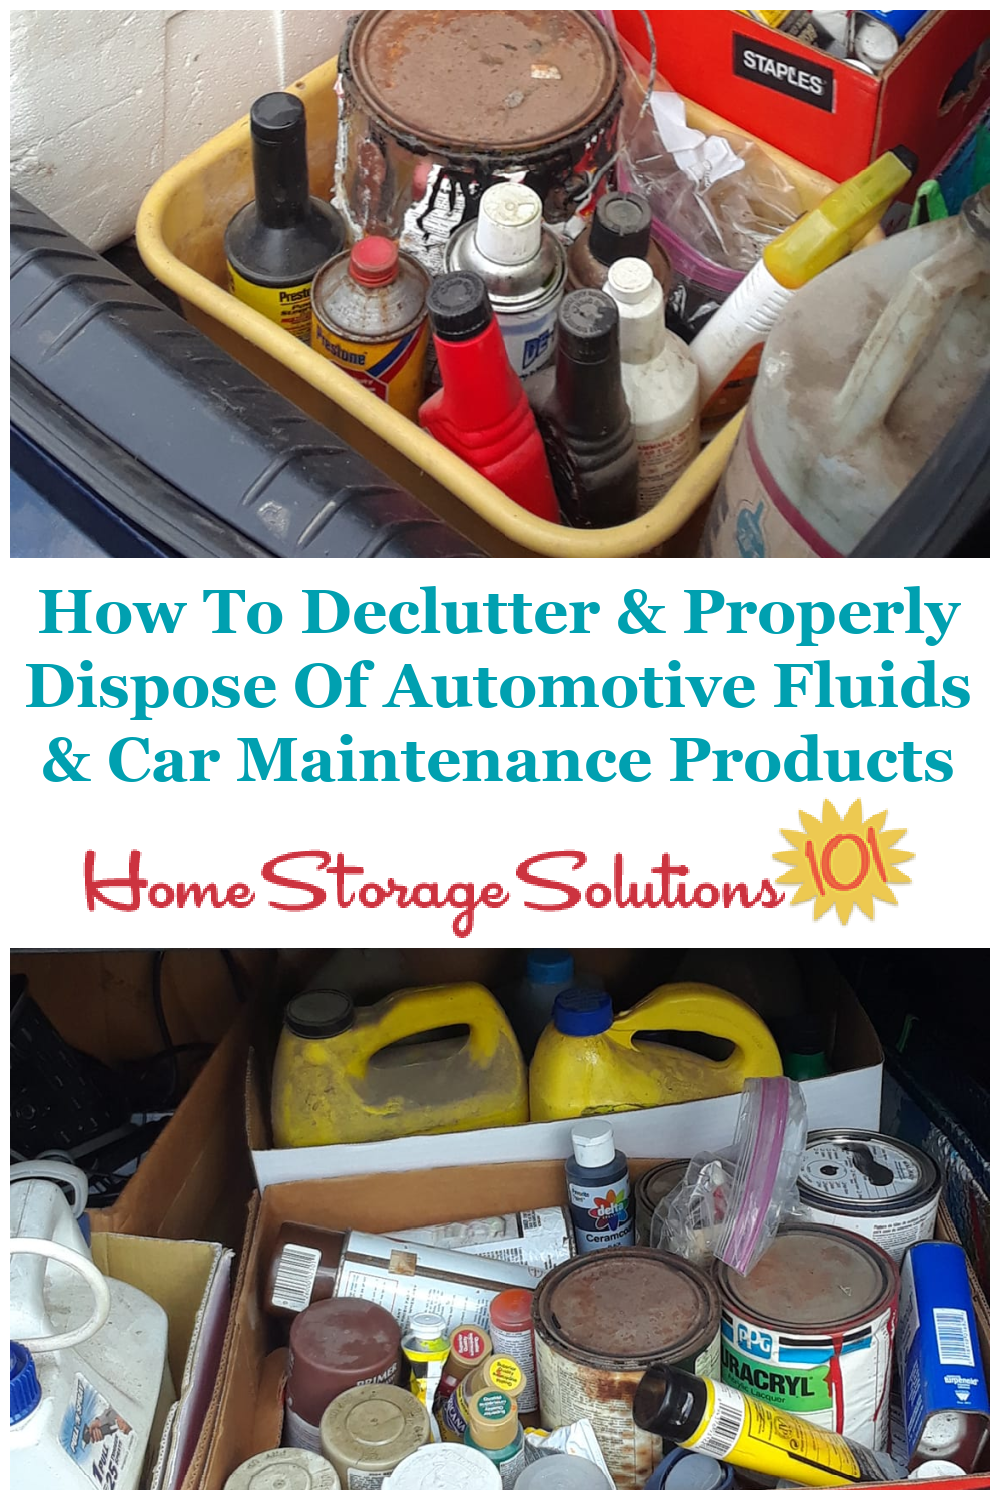 How to properly and safely dispose of automotive fluids and car maintenance products while decluttering {on Home Storage Solutions 101}